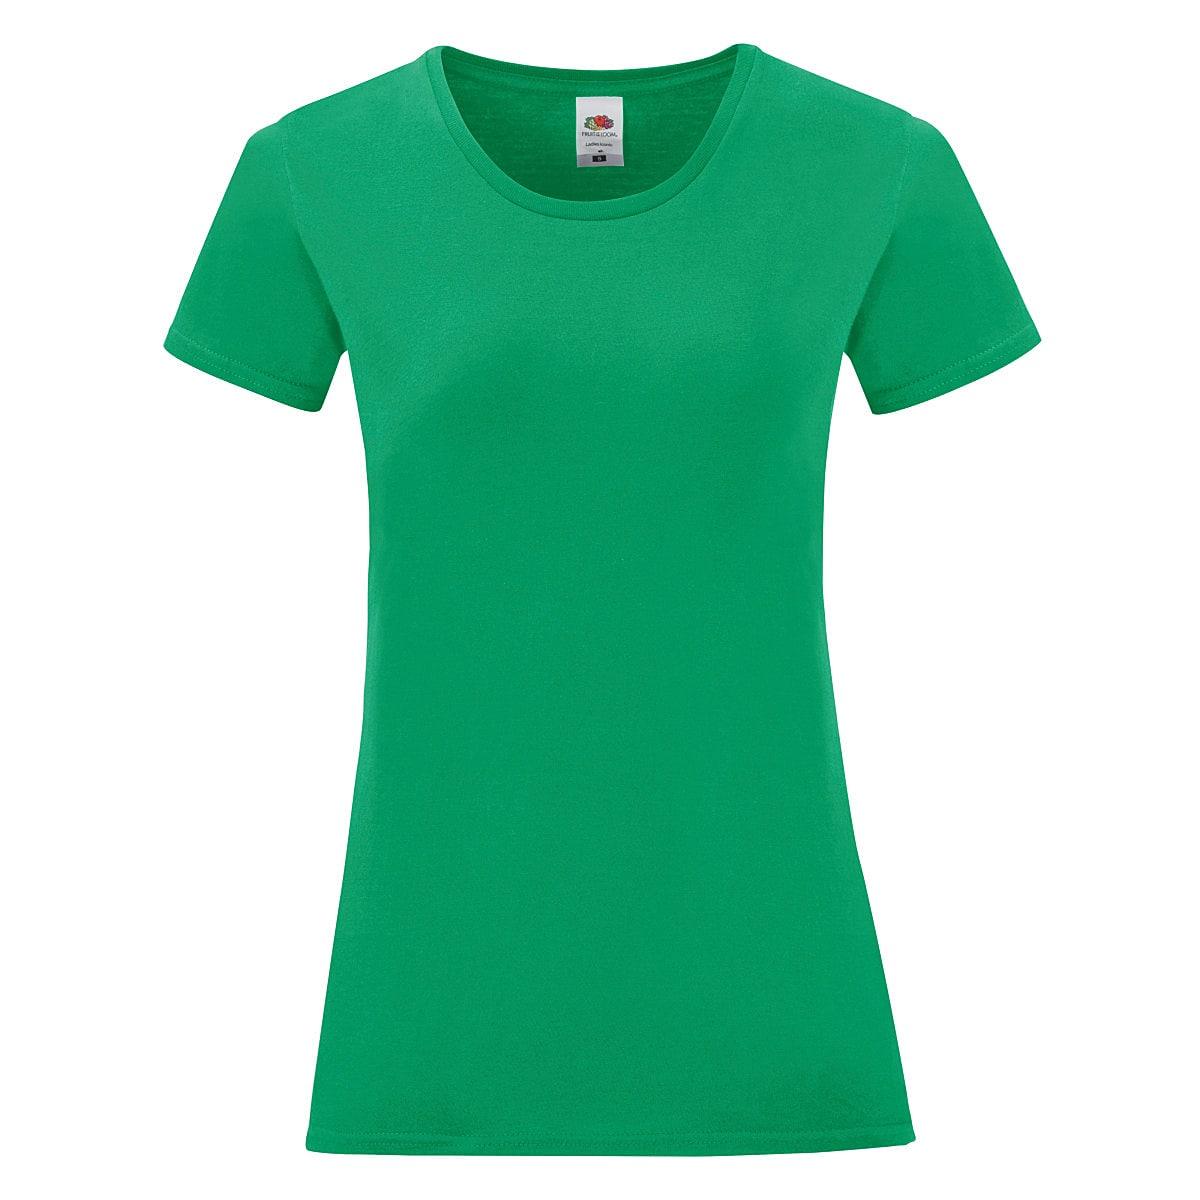 Fruit Of The Loom Womens Iconic T-Shirt in Kelly Green (Product Code: 61432)